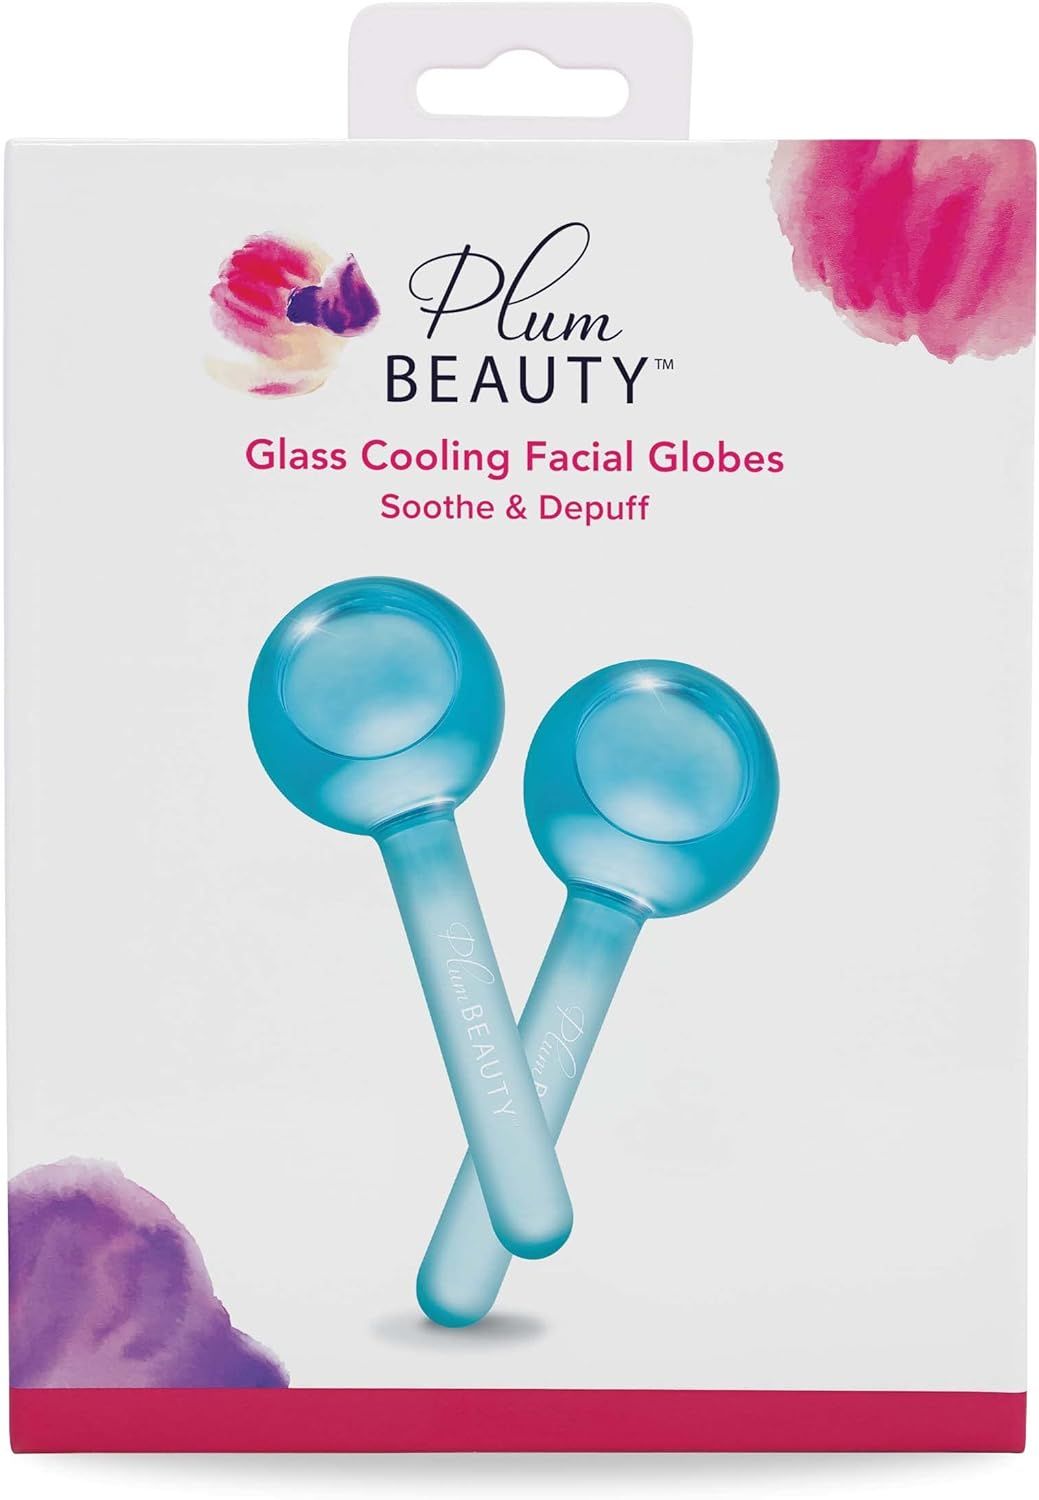 Plum Beauty, Glass Facial Cooling Globes, Reduce Face Puffiness, Increase Blood Circulation | Amazon (CA)